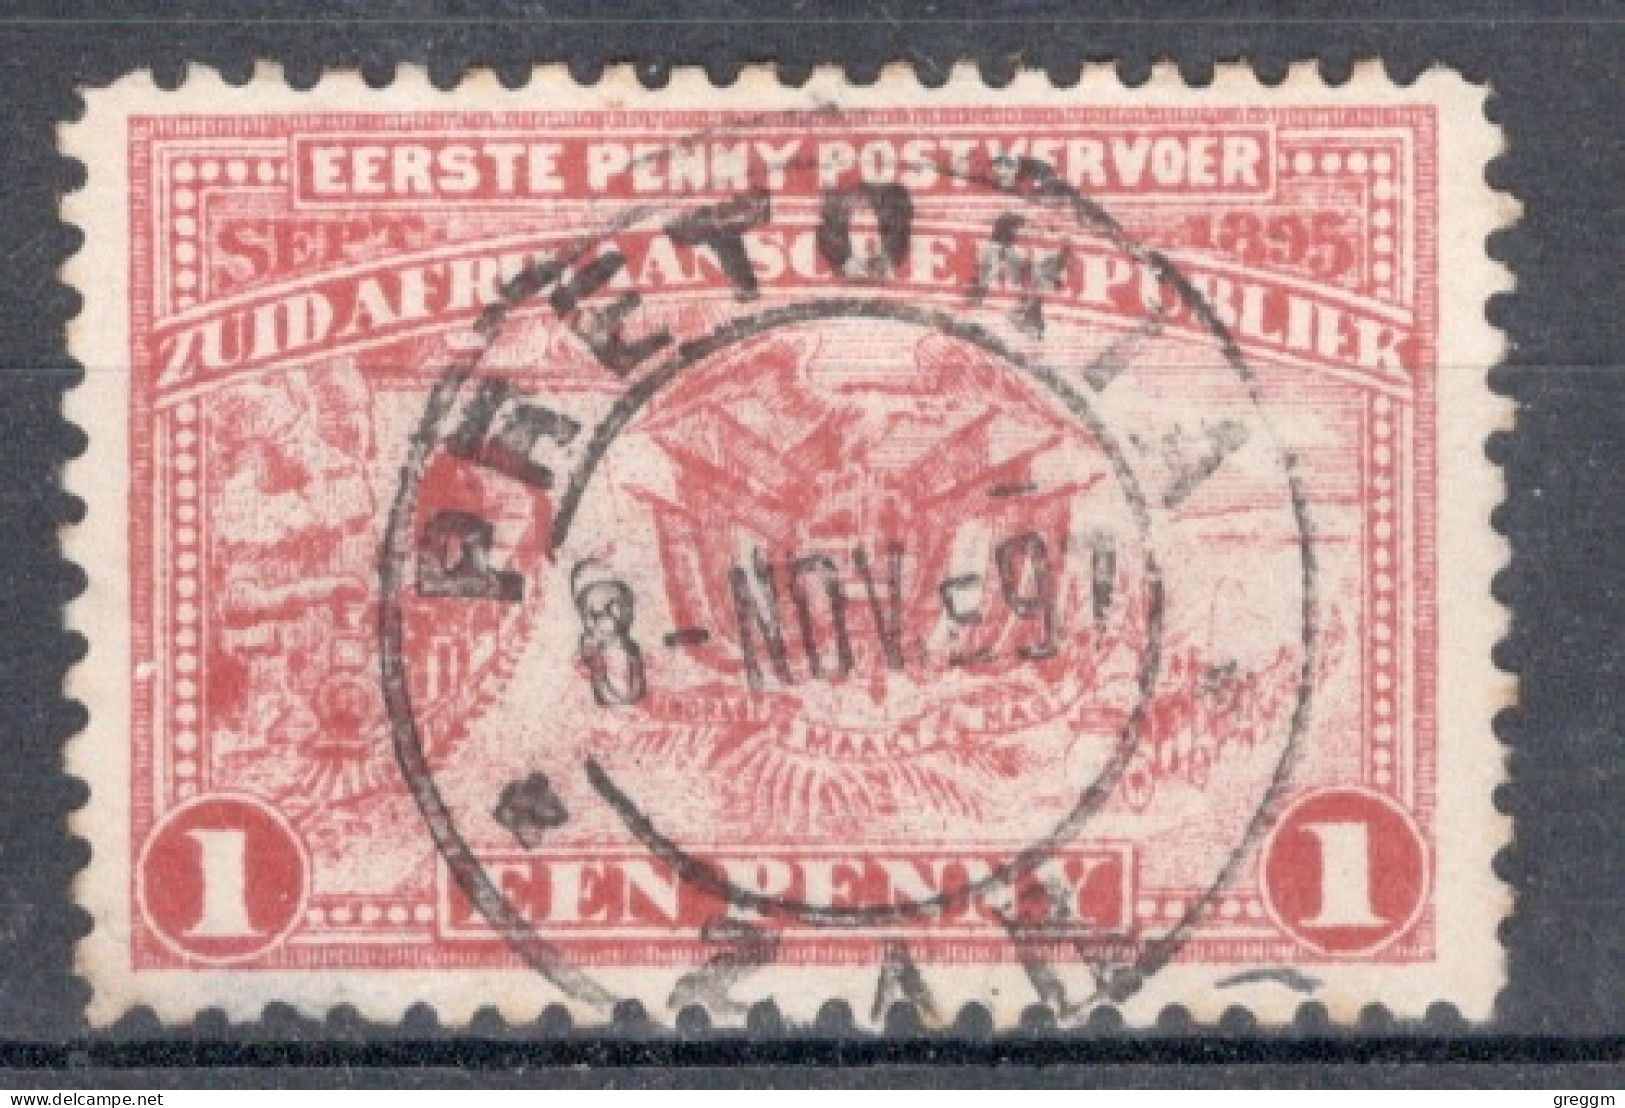 South African Republic 1895 Single 1d Coat Of Arms - Penny Postage In Fine Used - Neue Republik (1886-1887)